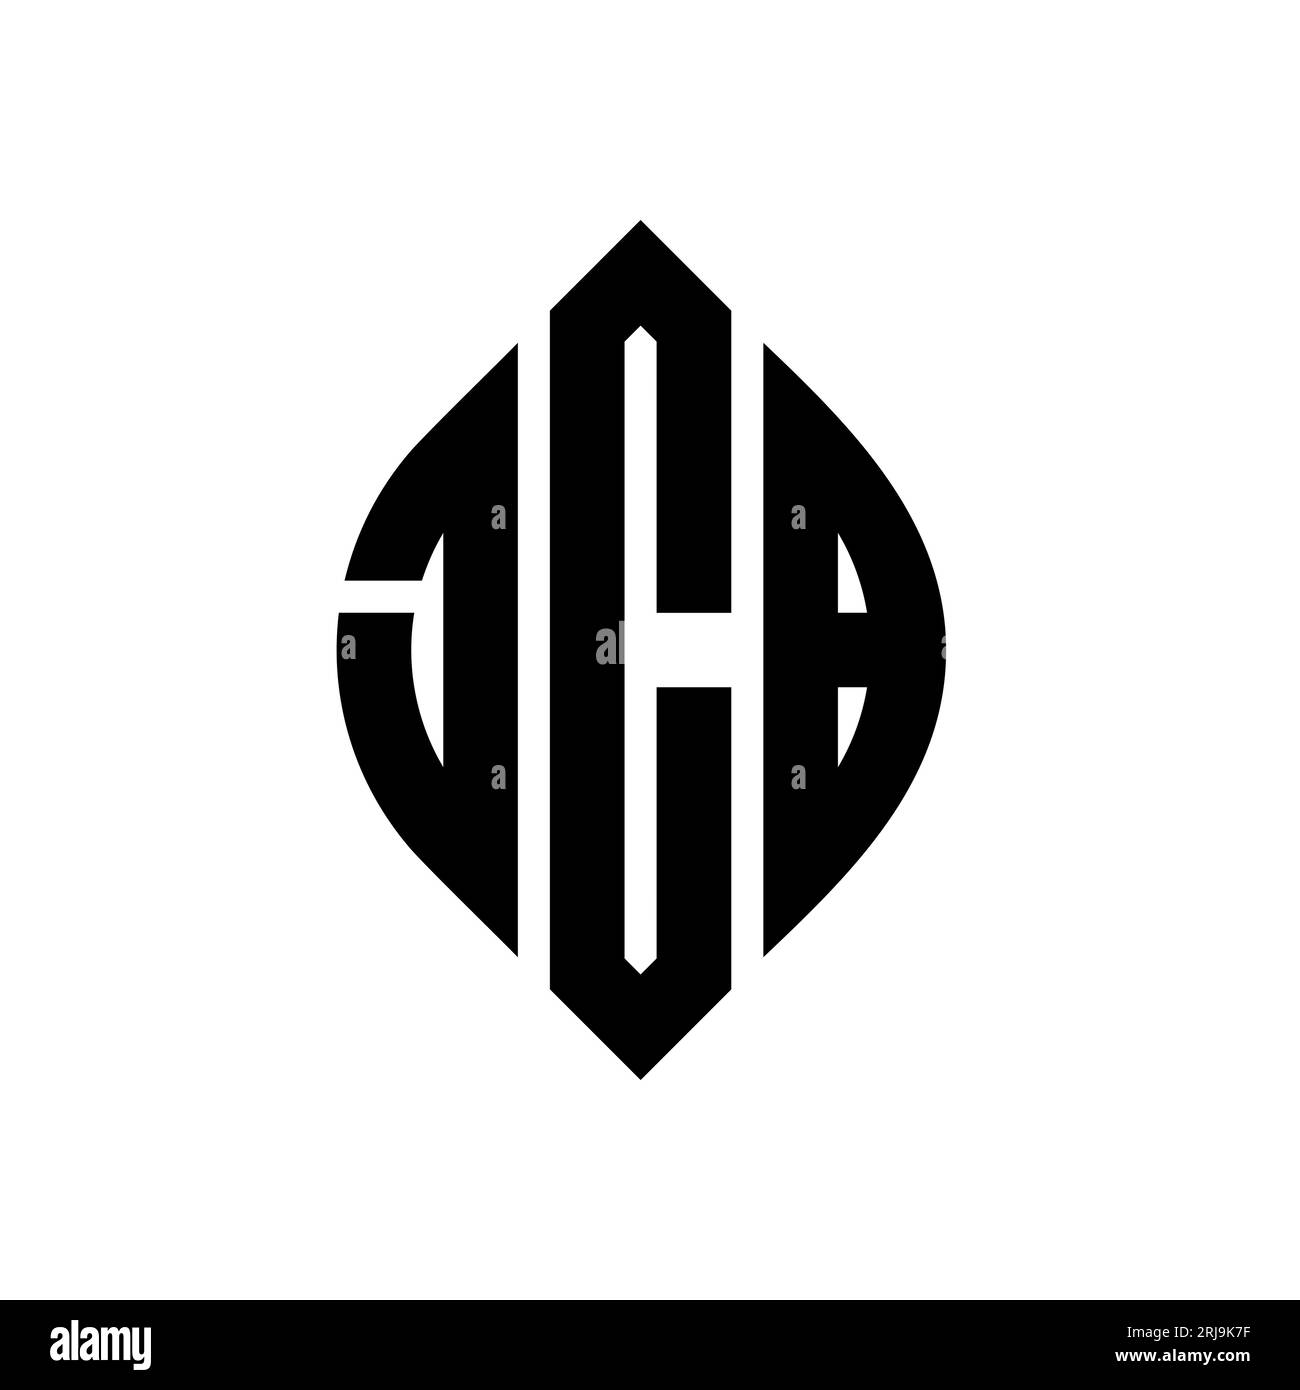 Jcb logo Cut Out Stock Images & Pictures - Alamy